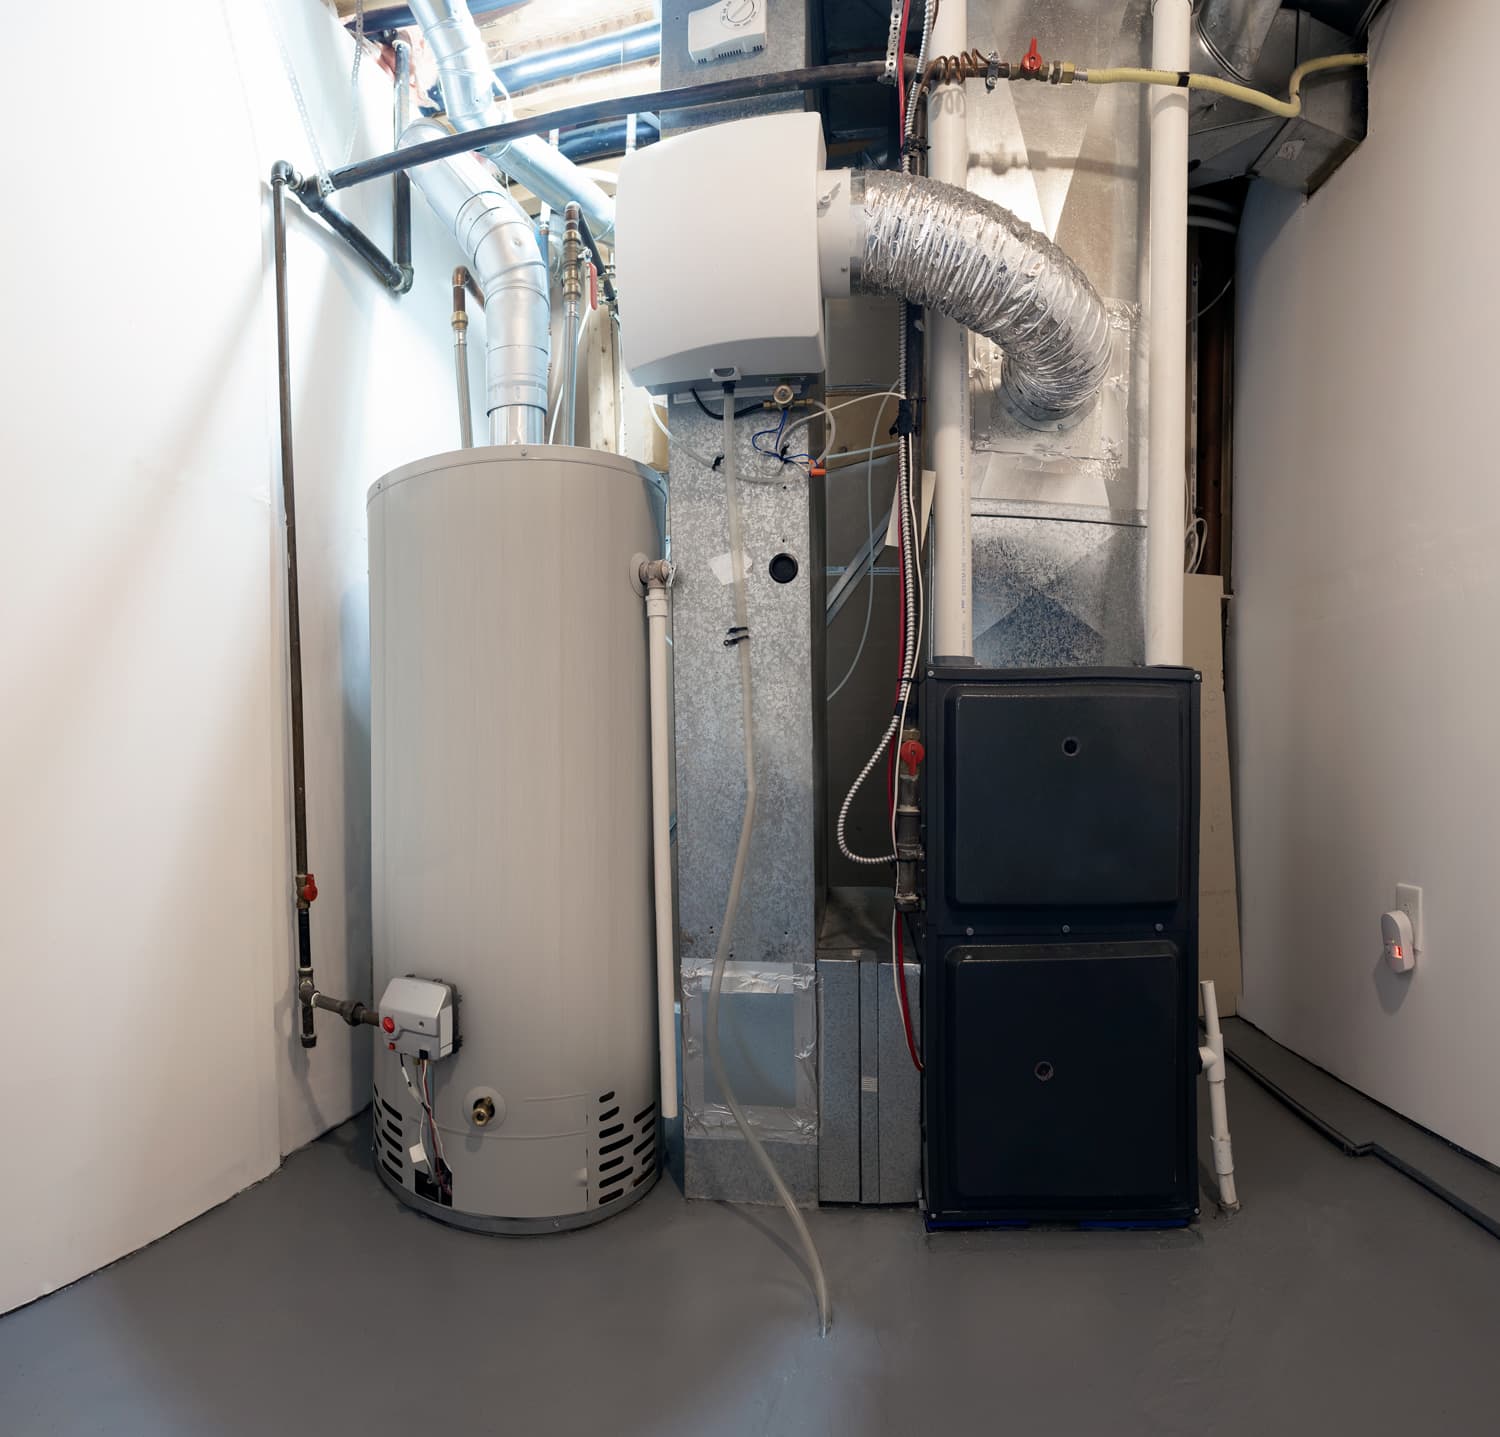 A home high efficiency furnace, boiler water heater and humidifier.